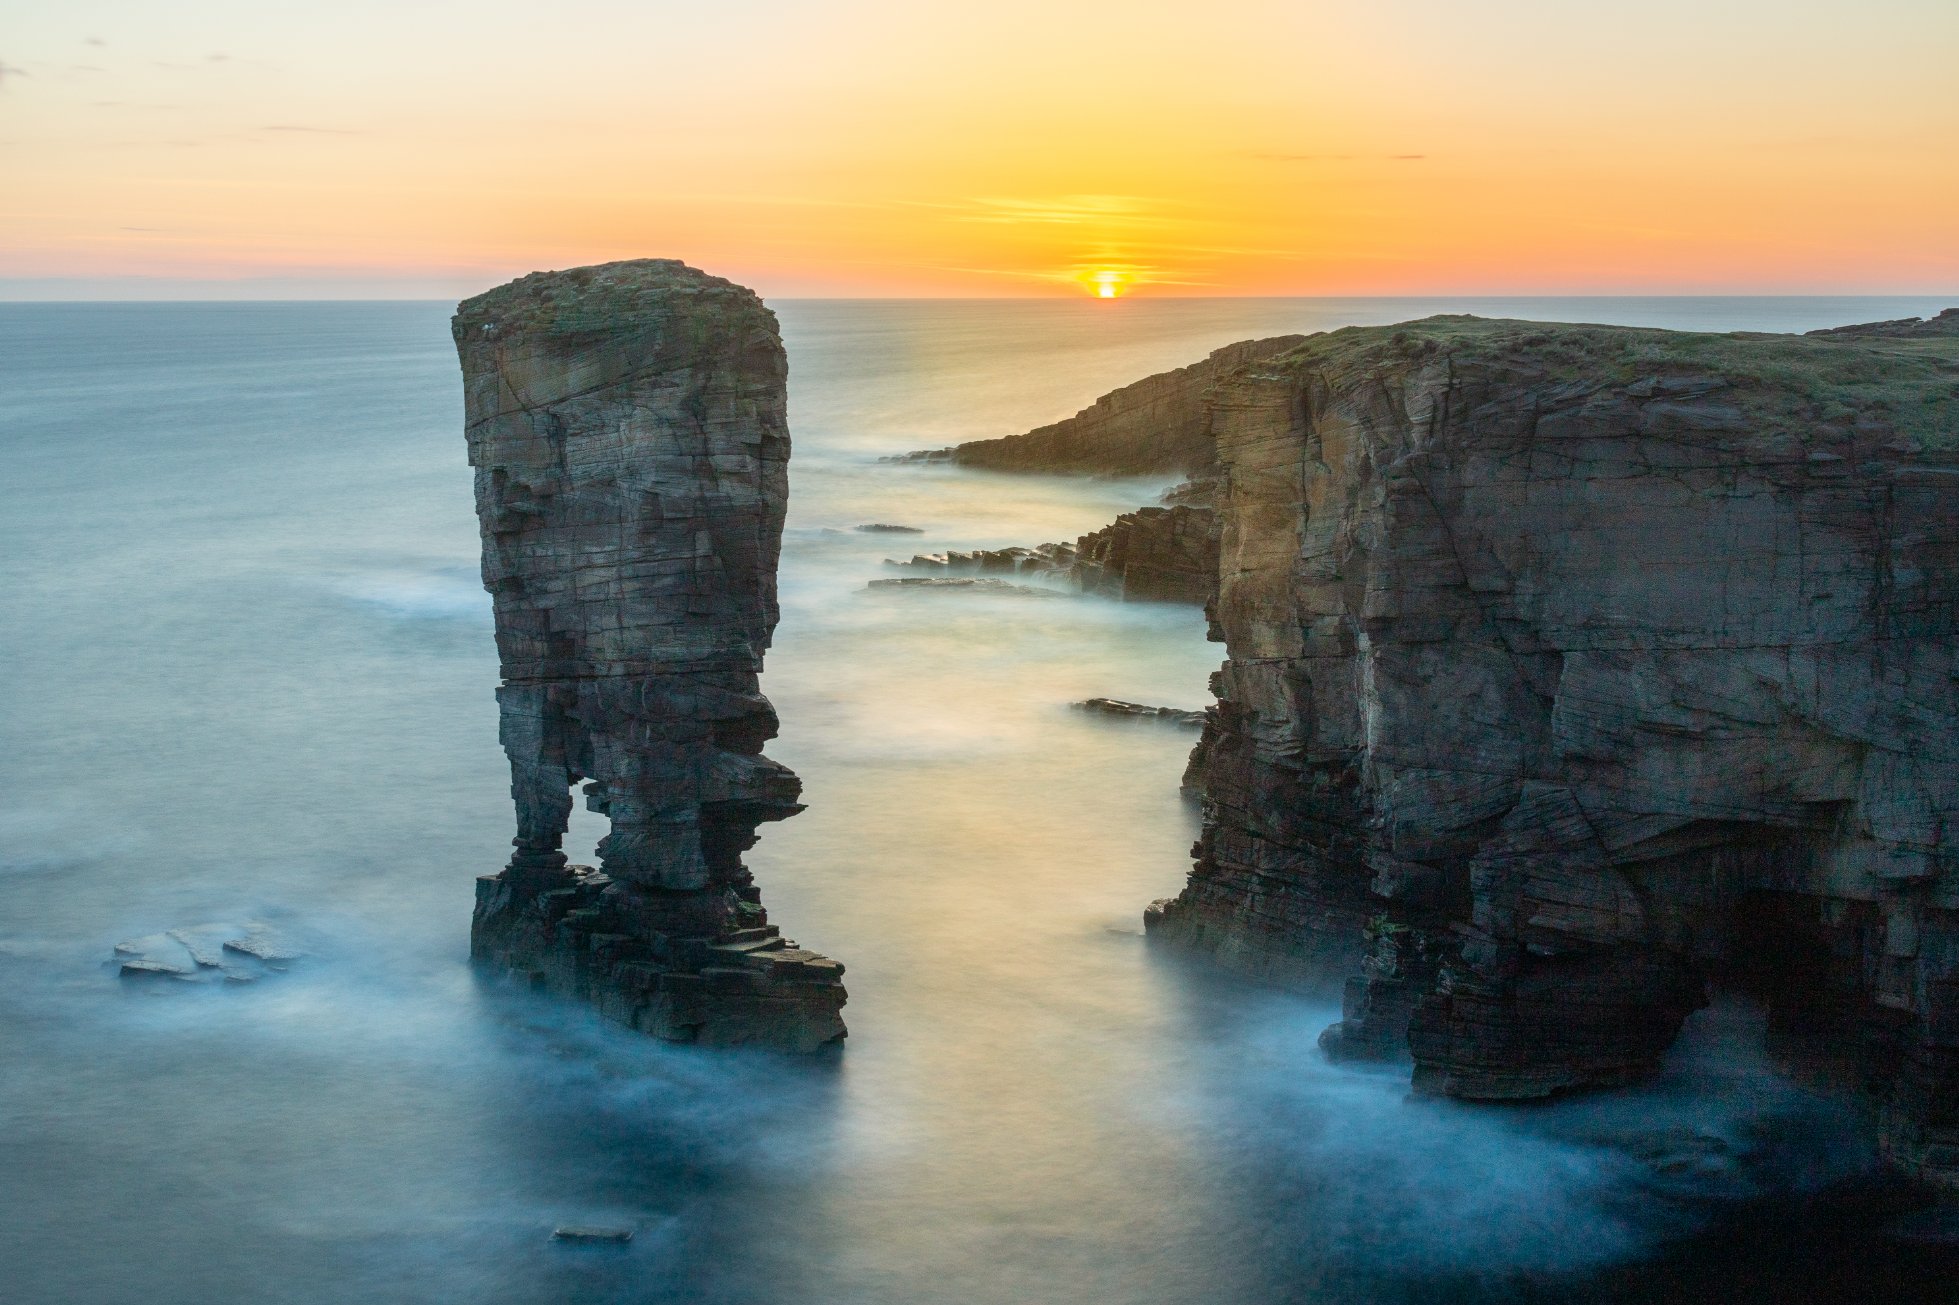 Yesnaby Castle, Orkney - image by Akmal Hakim